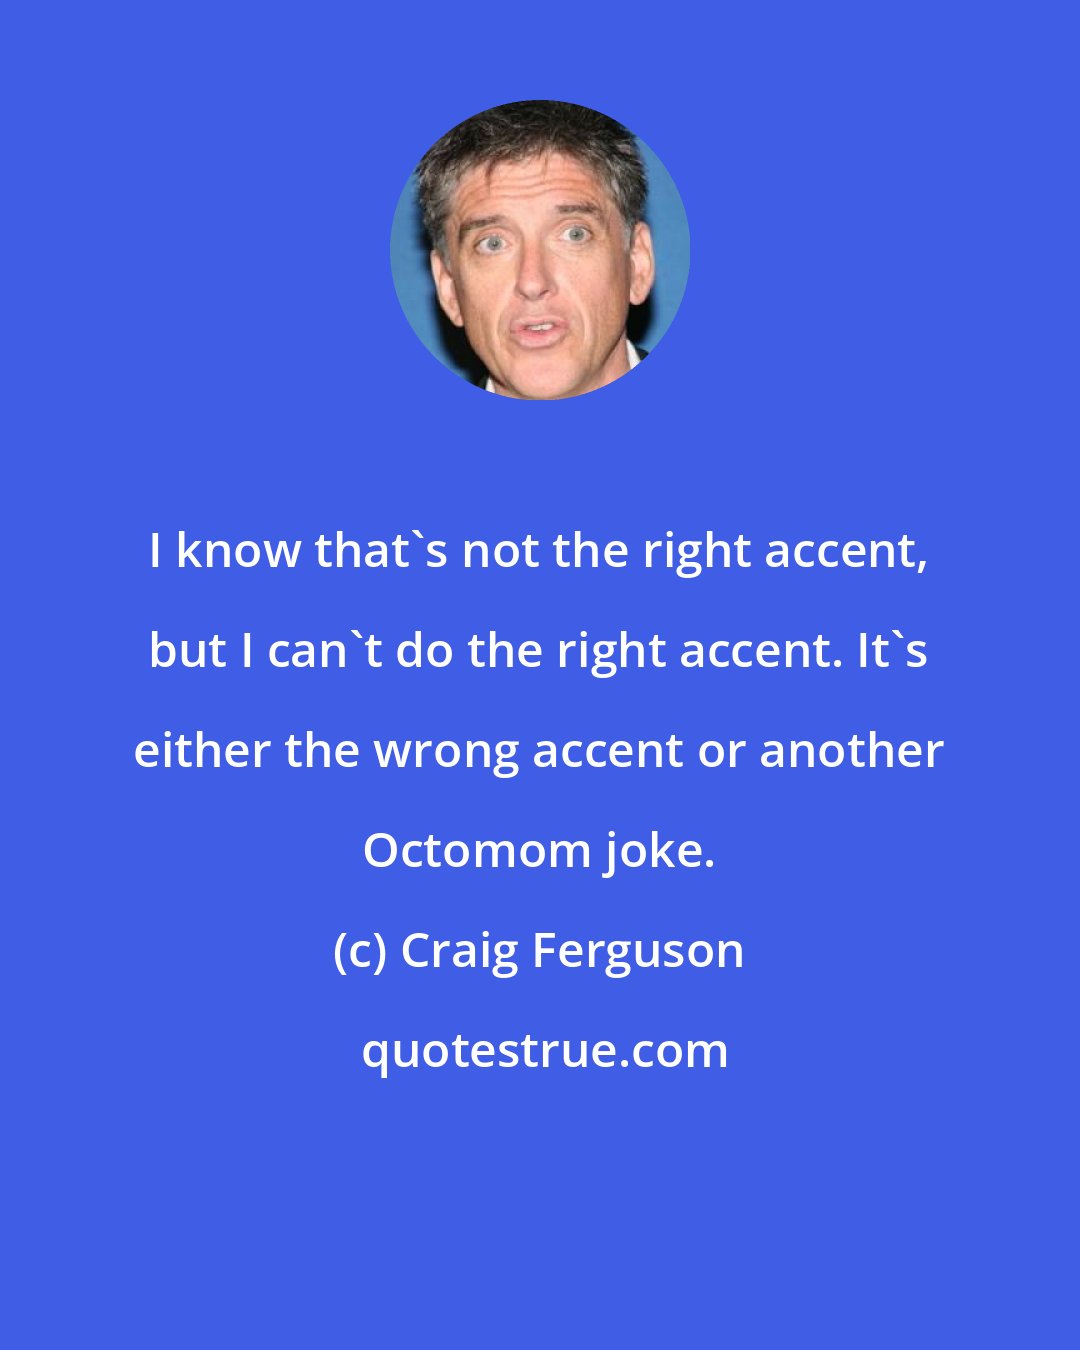 Craig Ferguson: I know that's not the right accent, but I can't do the right accent. It's either the wrong accent or another Octomom joke.